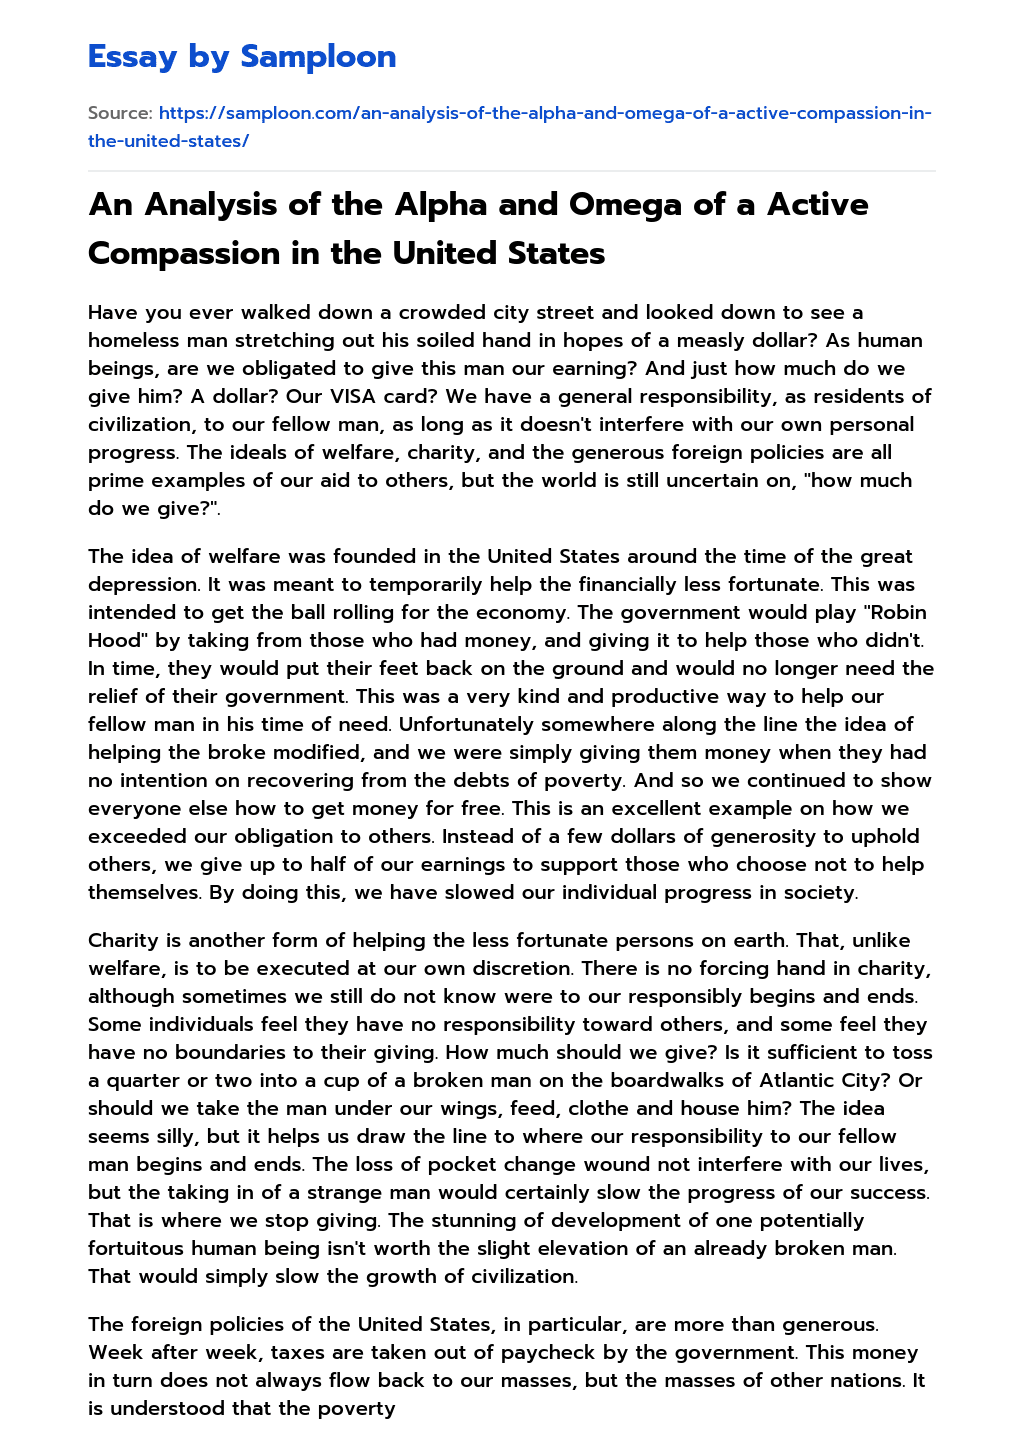 An Analysis of the Alpha and Omega of a Active Compassion in the United States essay